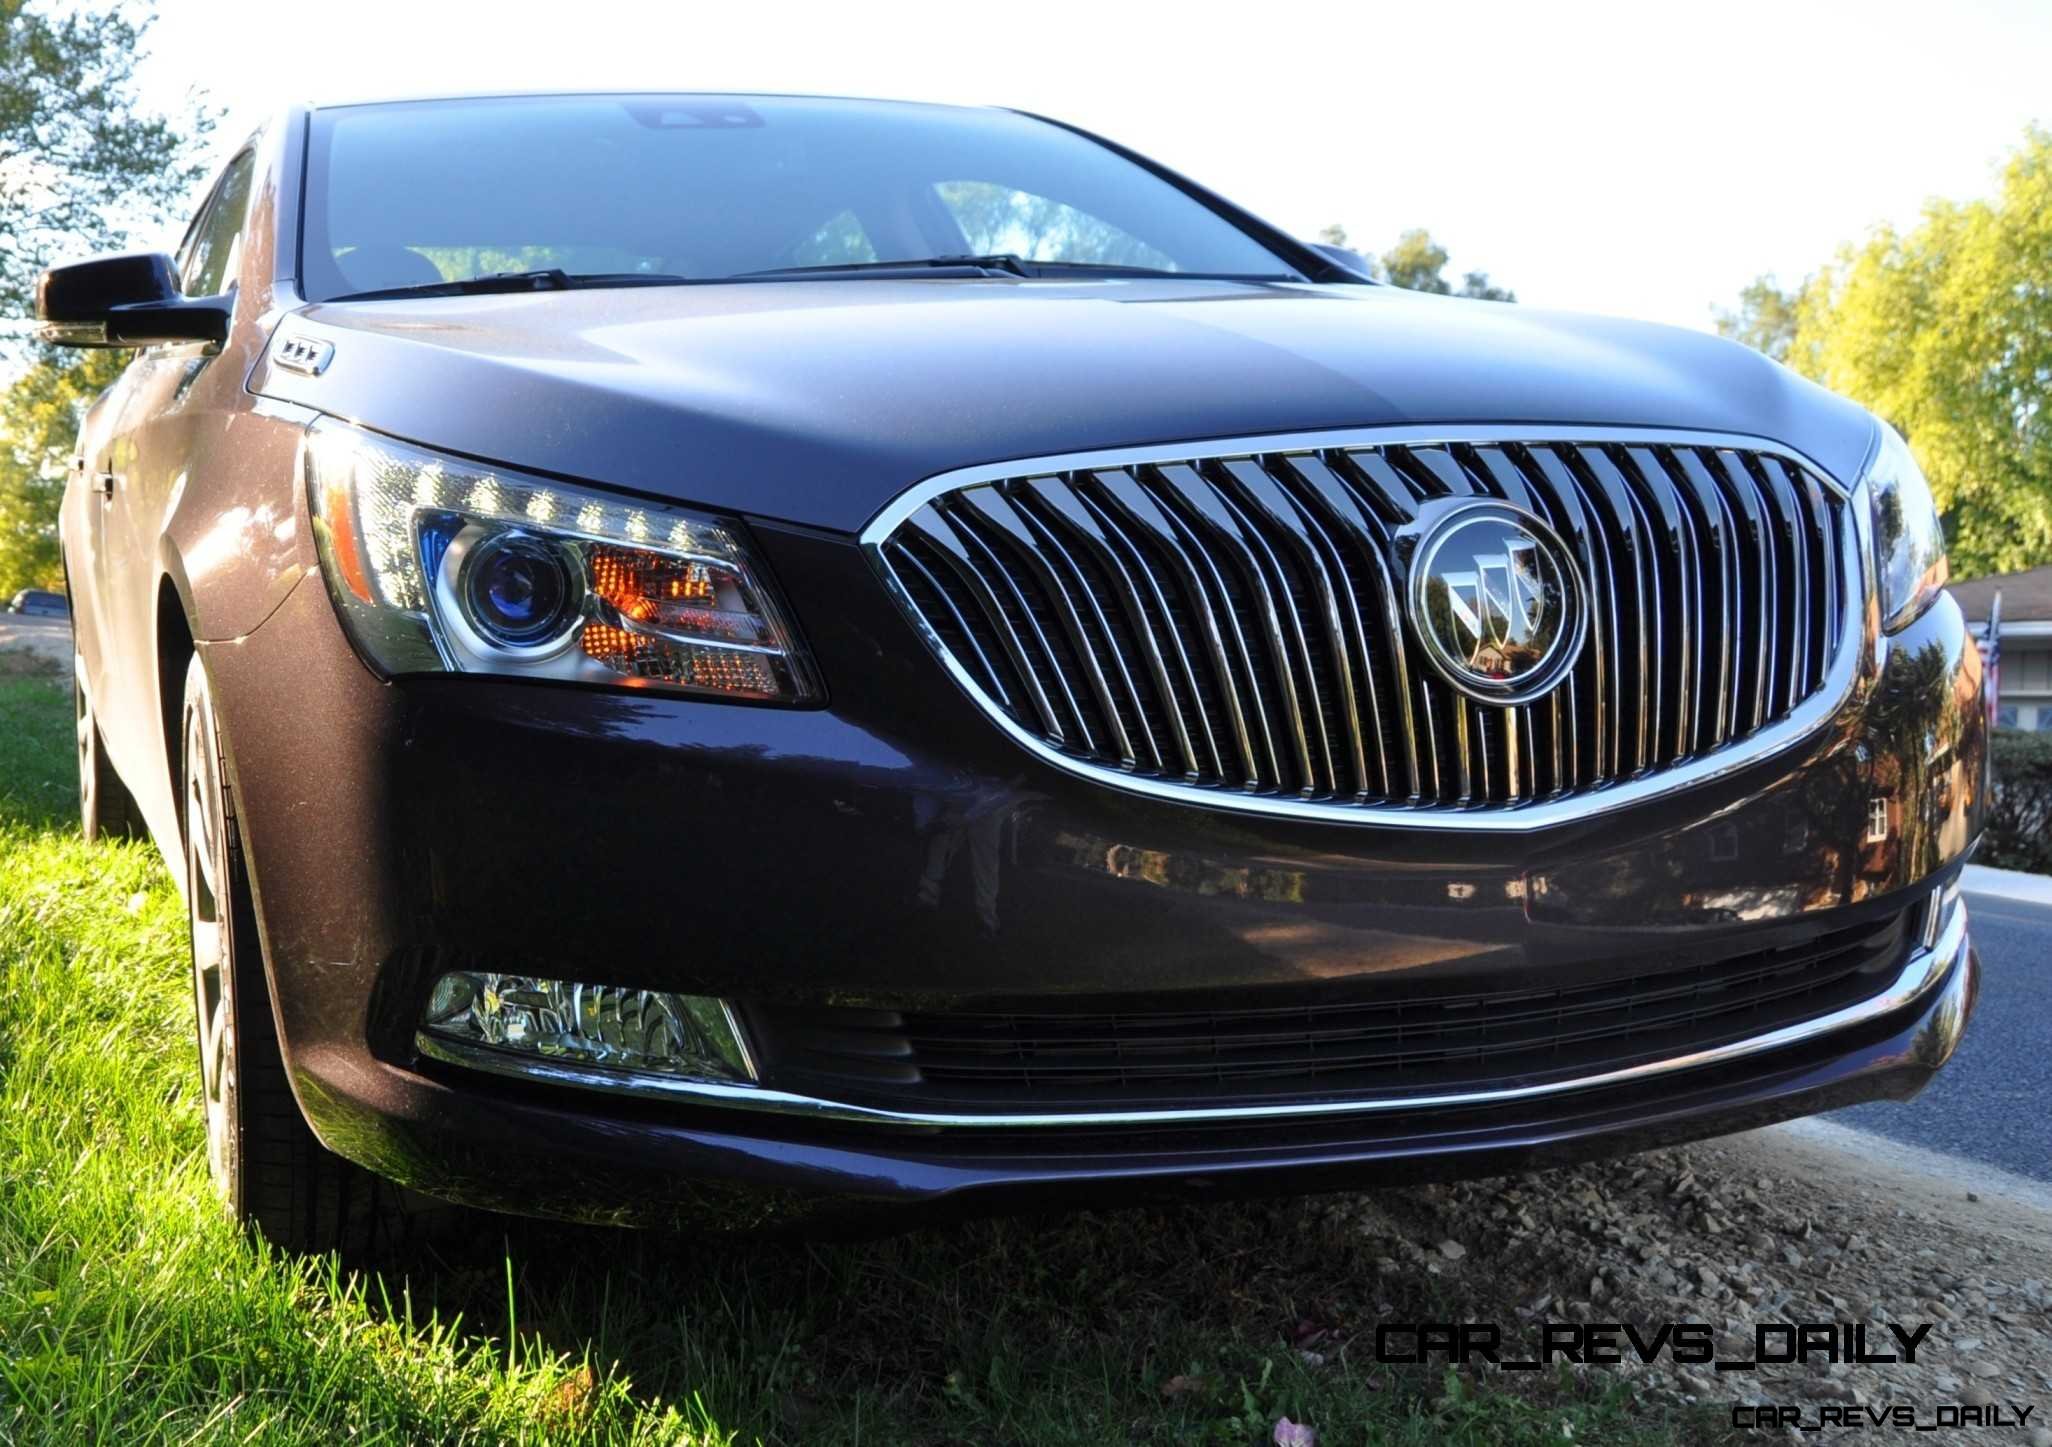 Driven Car Review - 2014 Buick LaCrosse Is Huge, Smooth and Silent